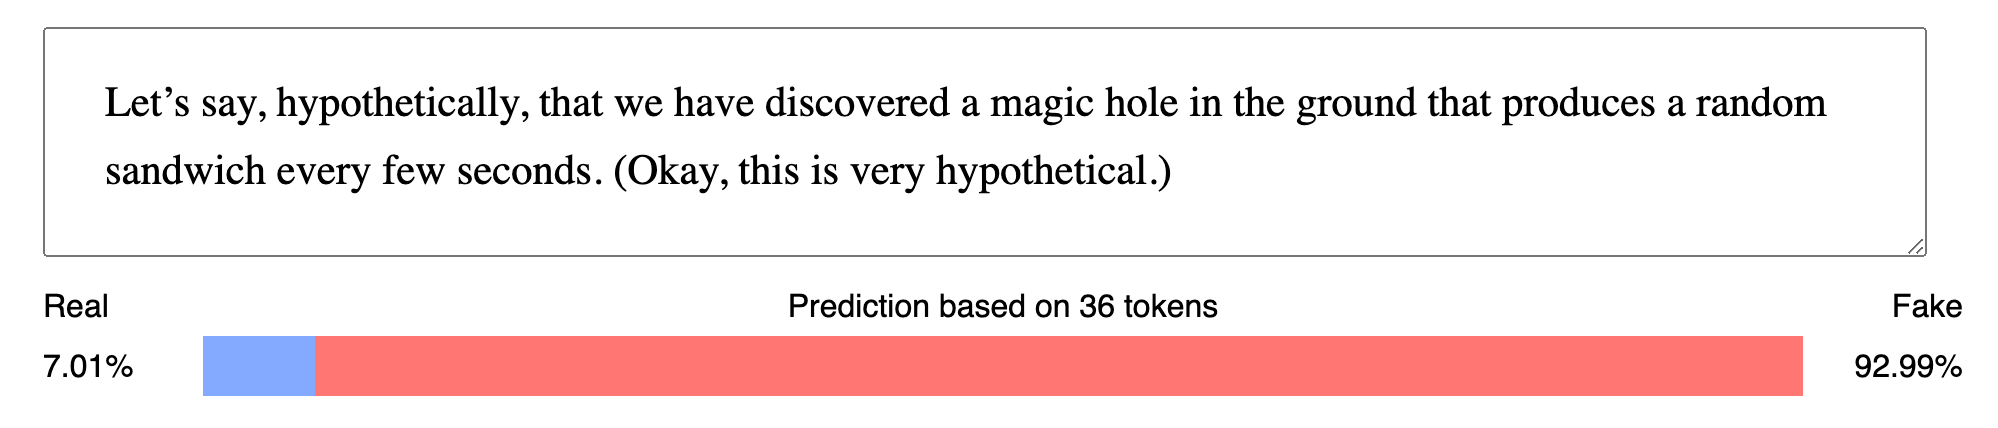 Input: Let’s say, hypothetically, that we have discovered a magic hole in the ground that produces a random sandwich every few seconds. (Okay, this is very hypothetical.). Prediction based on 36 tokens: 92.99% Fake.